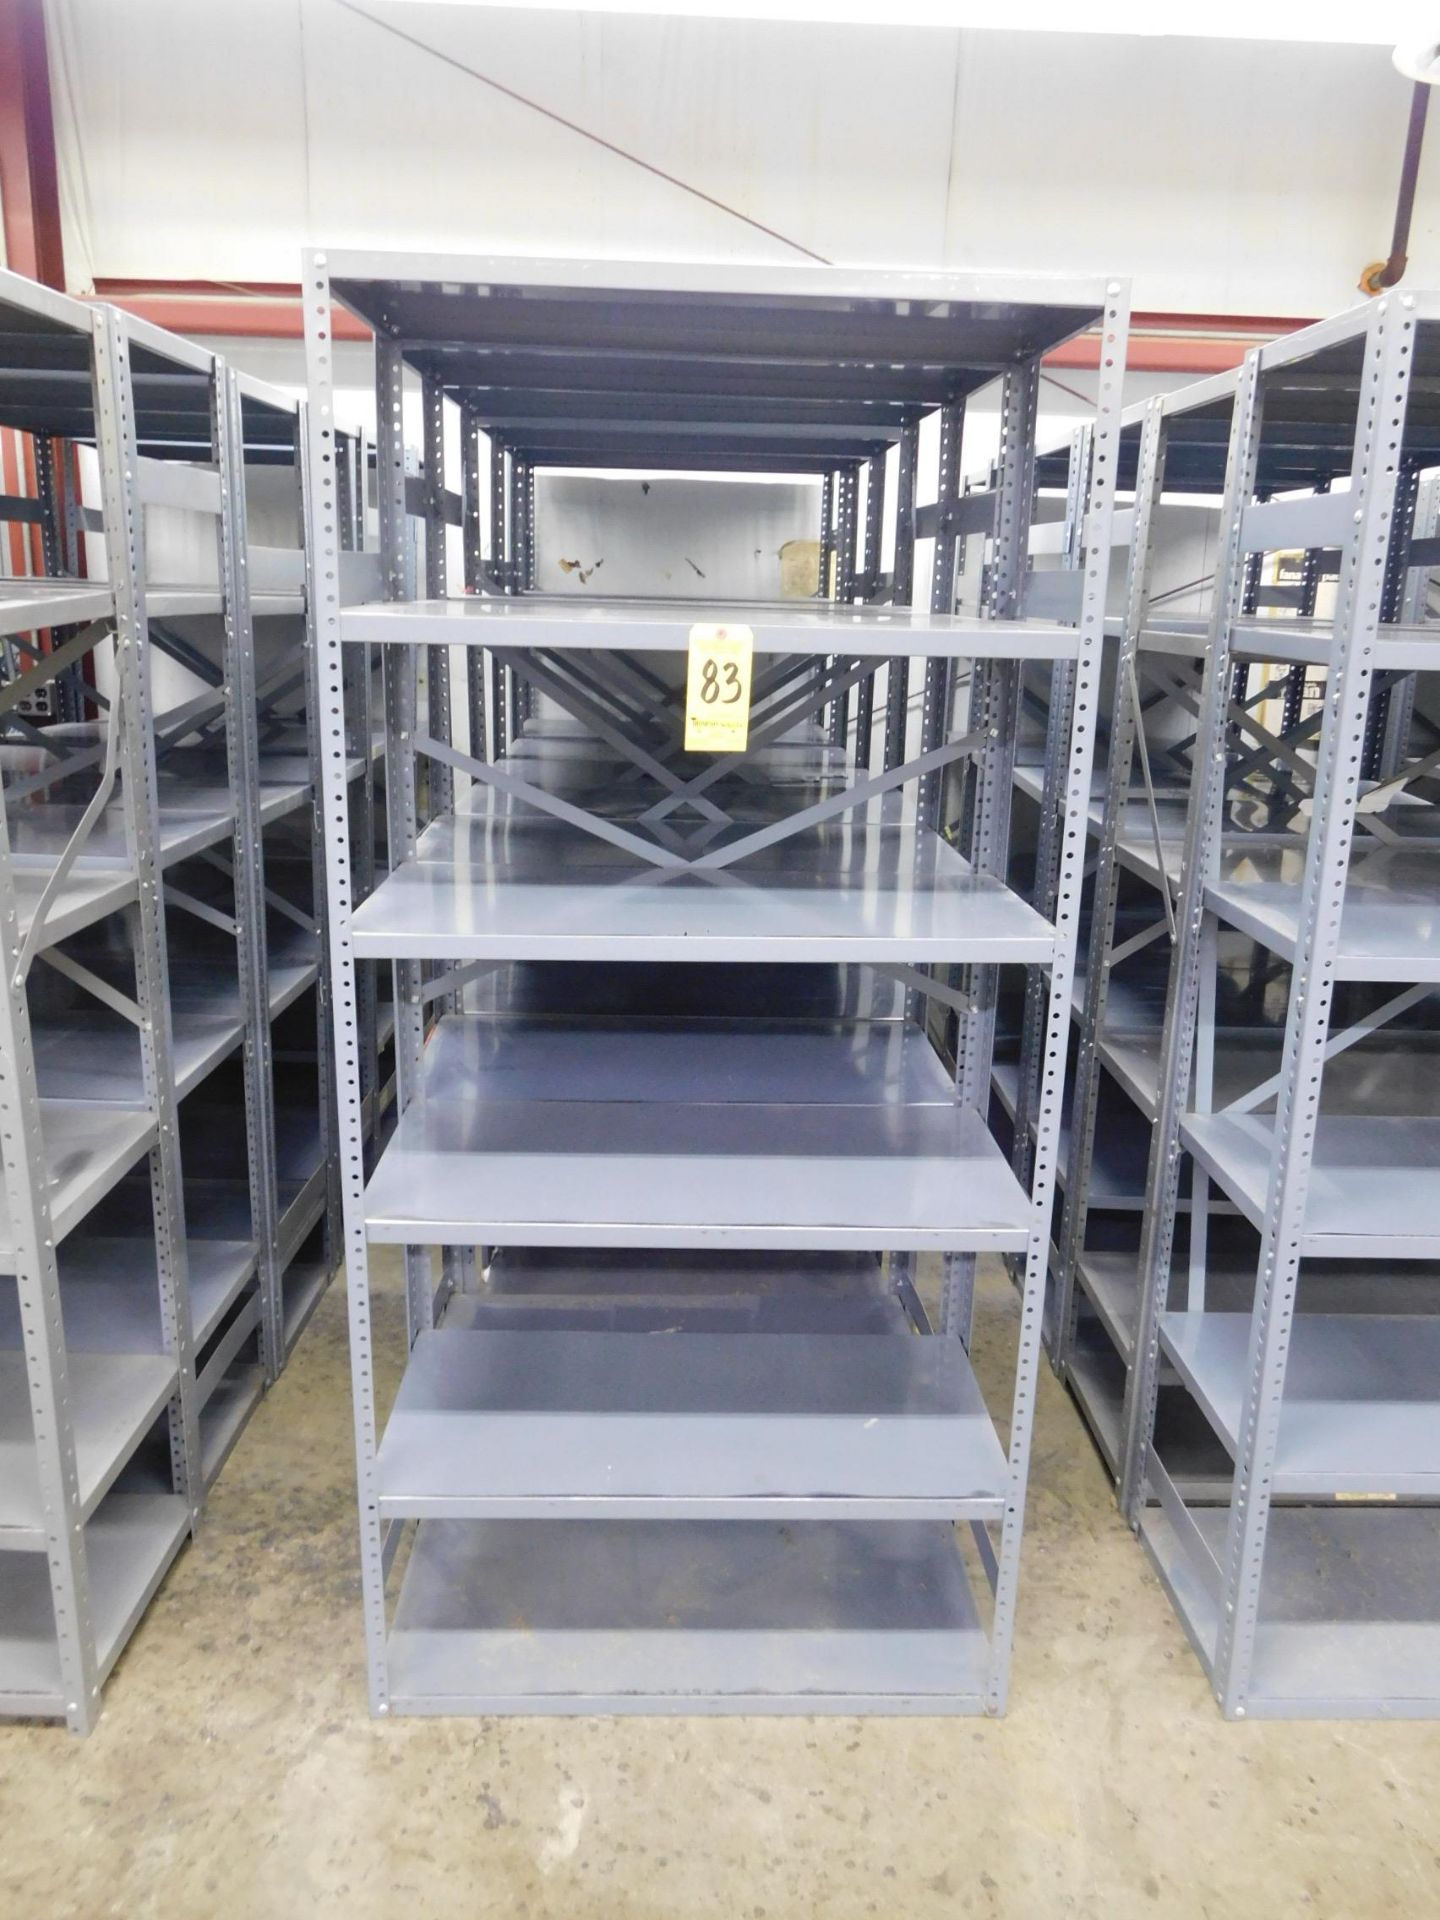 (6) Section of Shelving, 17 1/2" X 36" Wide X 75" Tall